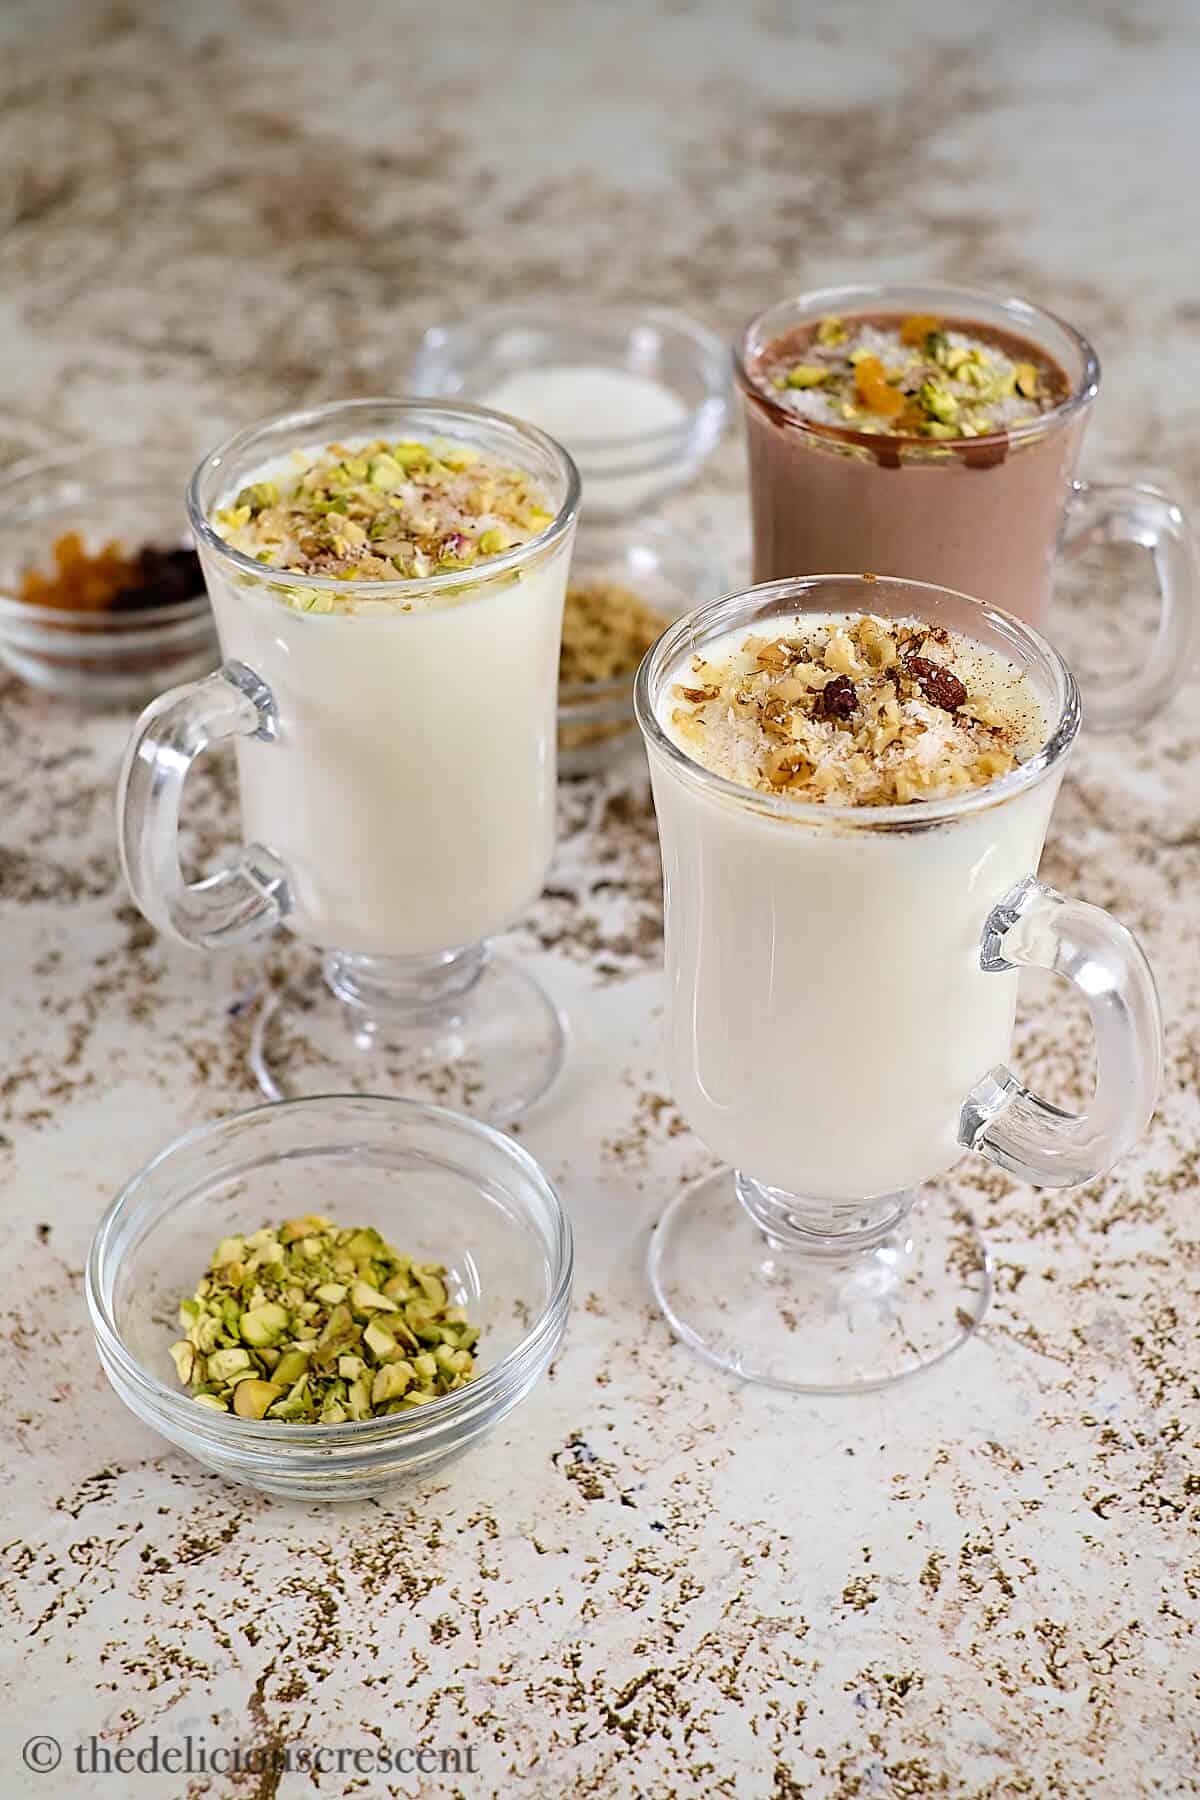 Middle eastern thin pudding drink with a variety of toppings.